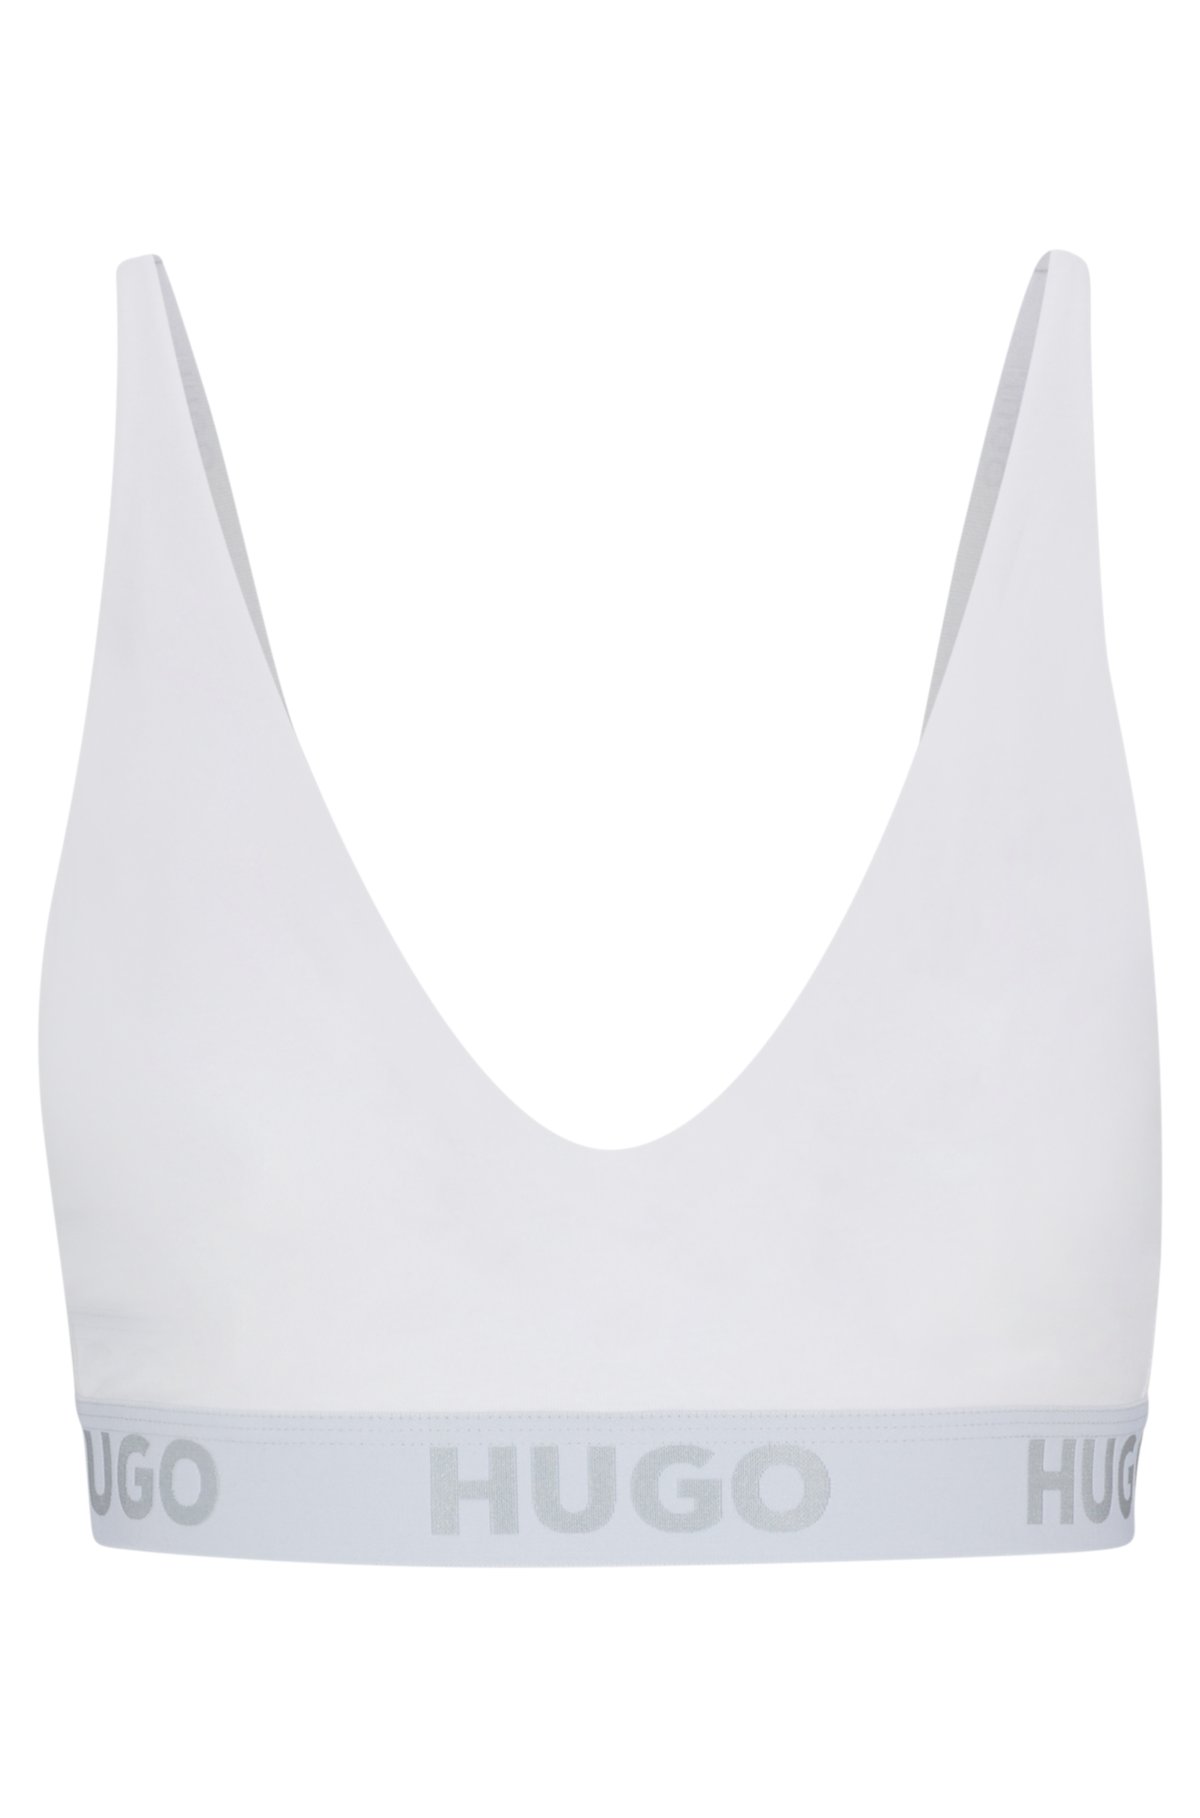 HUGO - Sports bra in stretch cotton with repeat logos